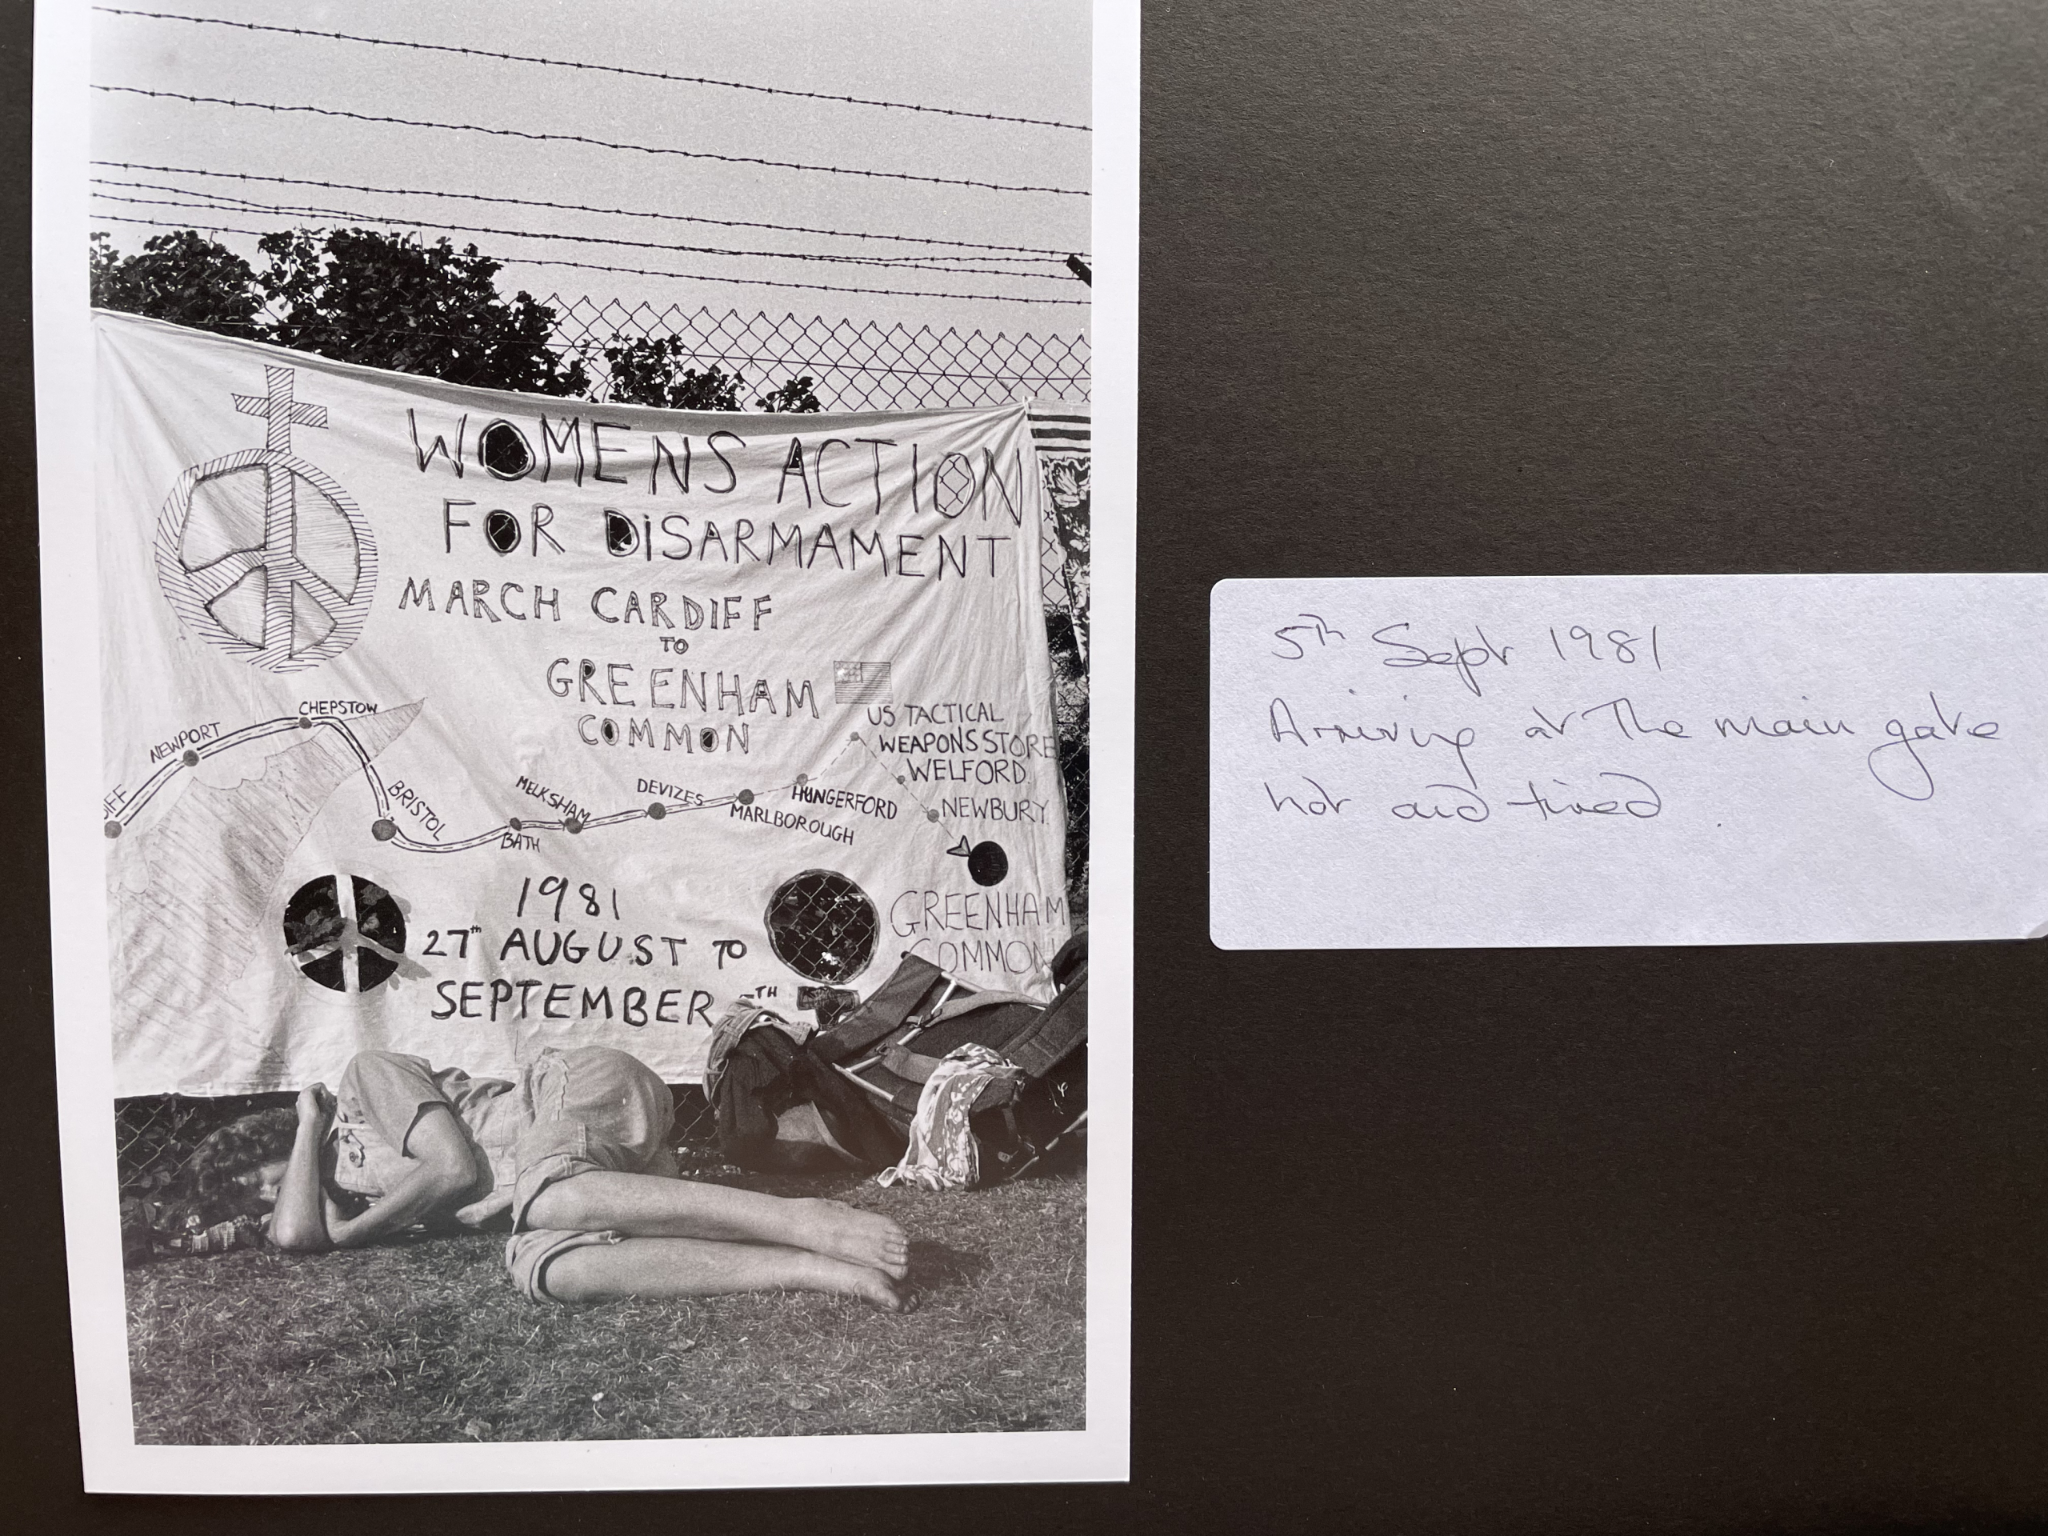 Scrapbook page. On the left, a black and white photograph in portrait orientation. A woman, arm across her face, lies outside on the grassy ground at the foot of a banner hung on a chain link fence. A large rucksack is beside her. The hand-drawn banner reads 'Women's action for disarmament march Cardiff to Greenham Common' and has the dates '1981 27th August to September 5th'. A map of the route is also drawn on the banner. To the right of the photo, a white sticker has the hand written caption: '5th Sept 1981. Arriving at the main gate hot and tired'.